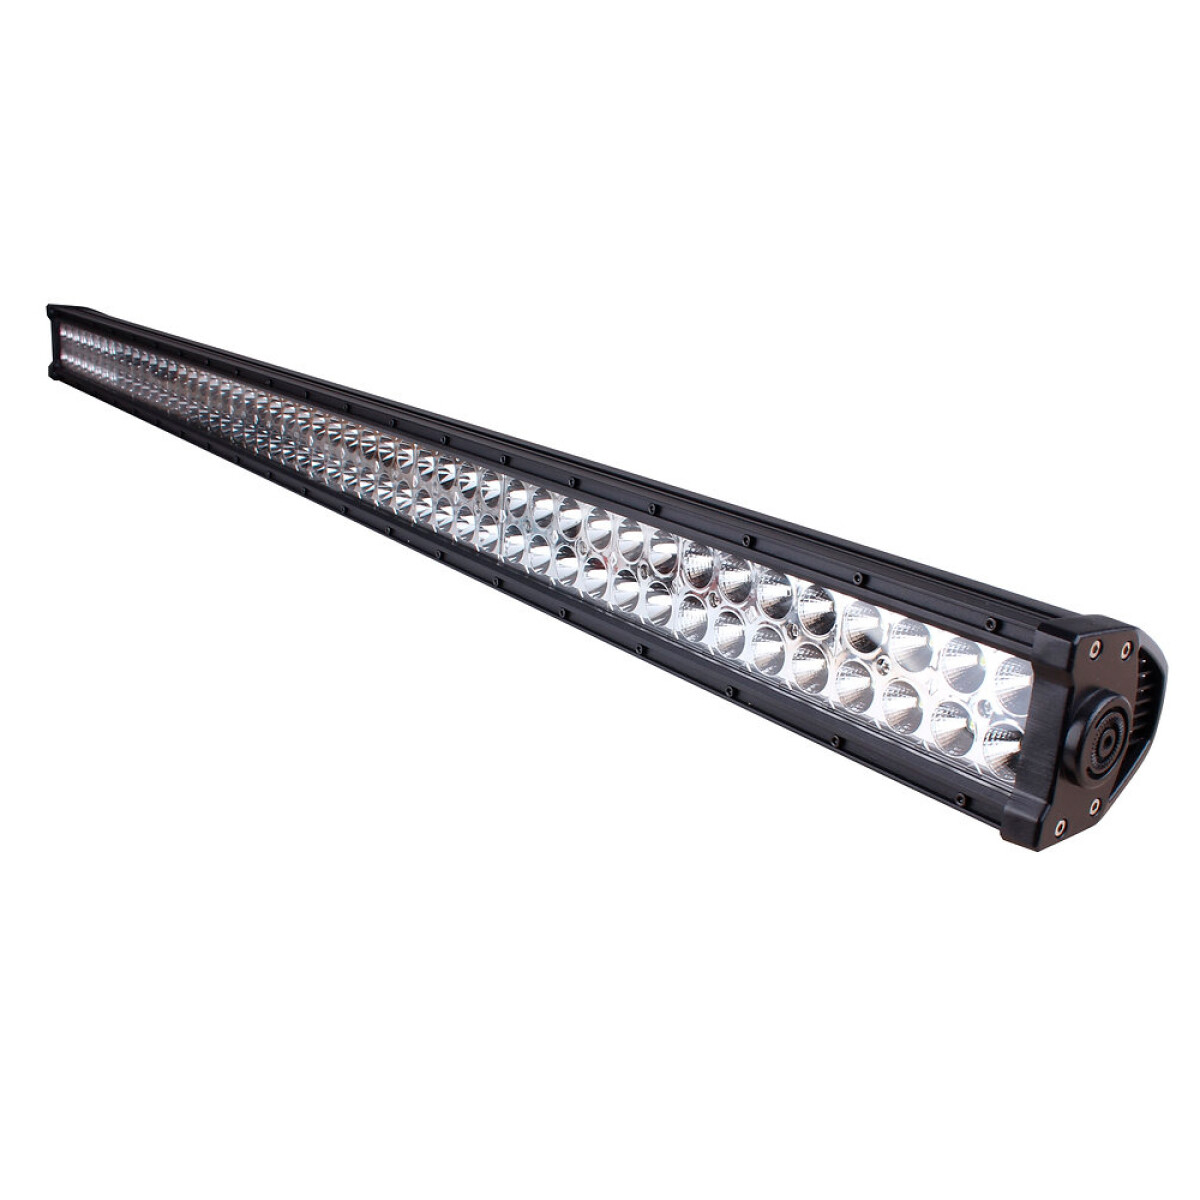 FARO LED - BARRAL LUCES 288W 1230MM 19200LM - 